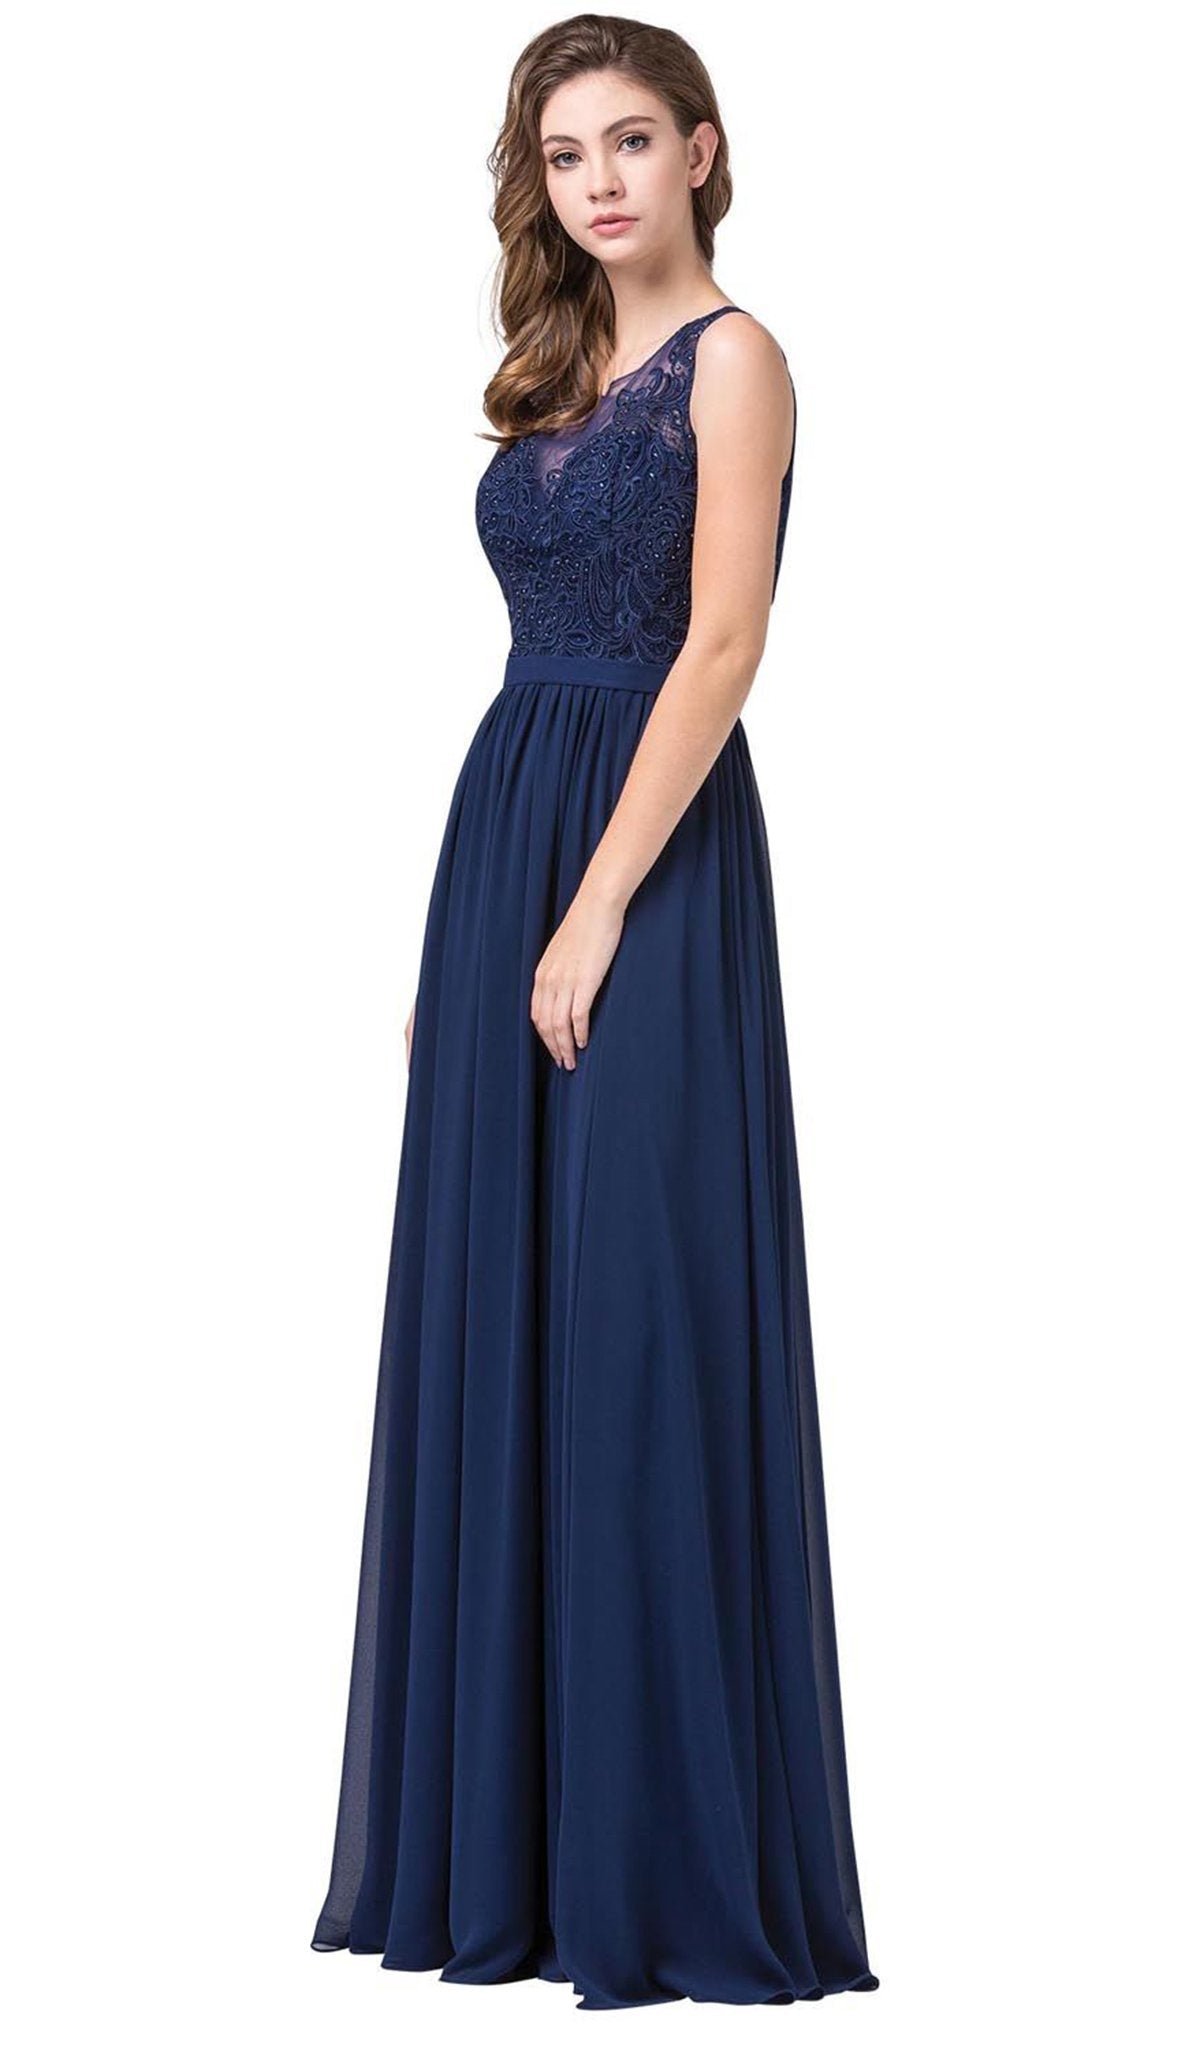 Dancing Queen - 2677 Illusion Neckline Beaded Lace Bodice Chiffon Gown In Blue